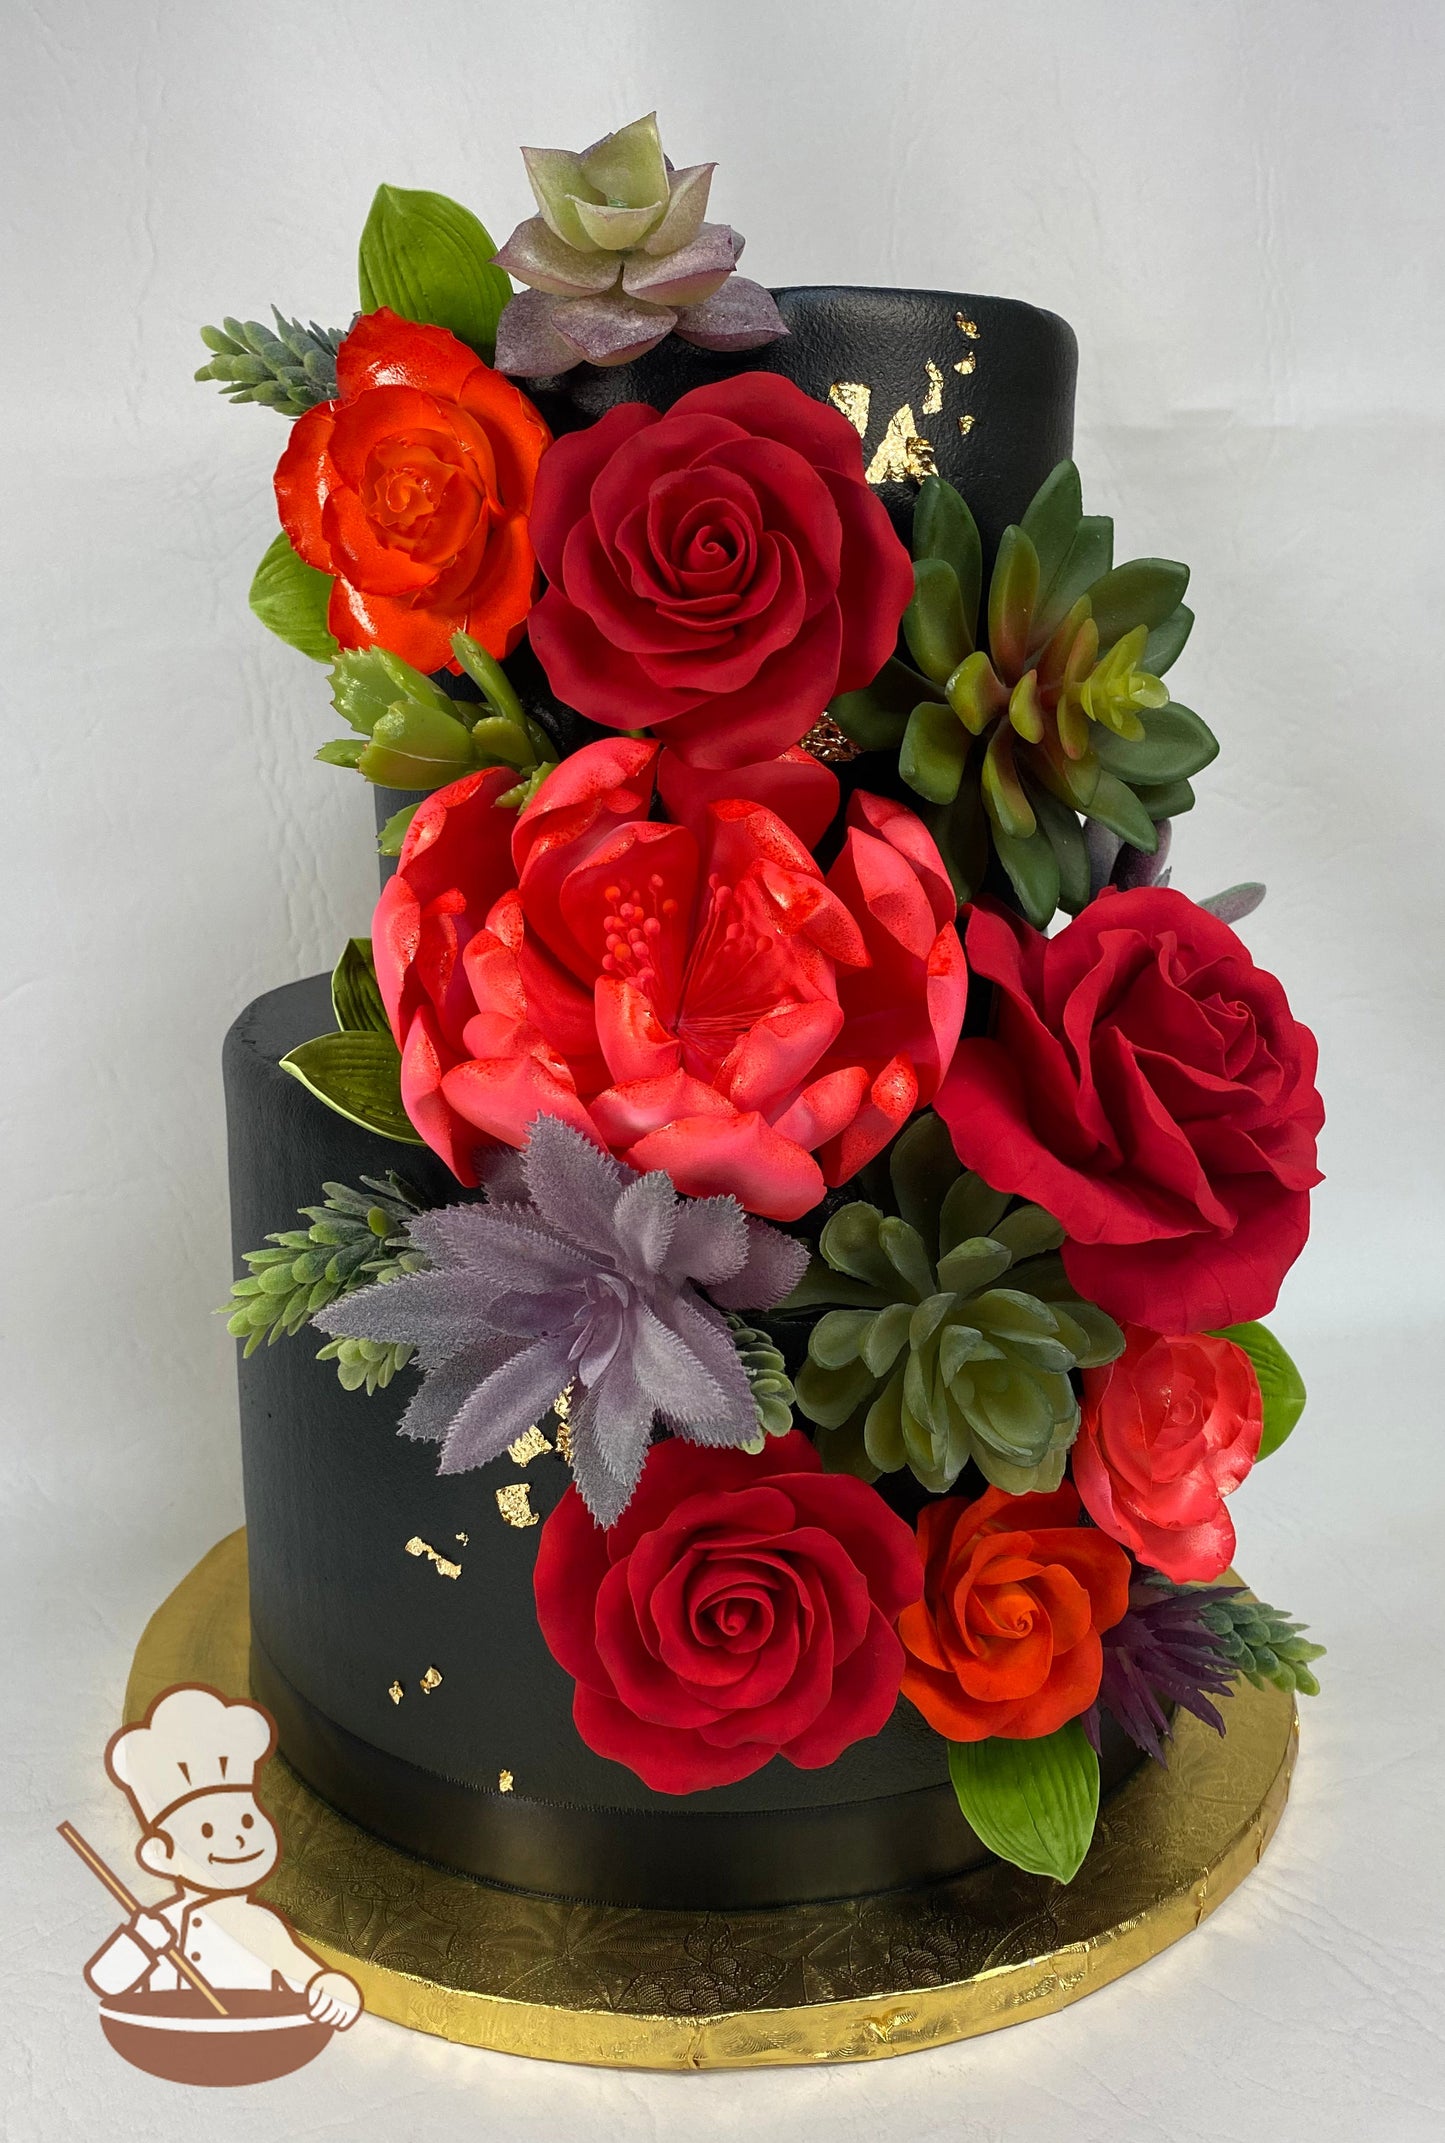 2 tier round wedding cake with black buttercream and decorated with assorted red sugar flowers with gold leaf accent.